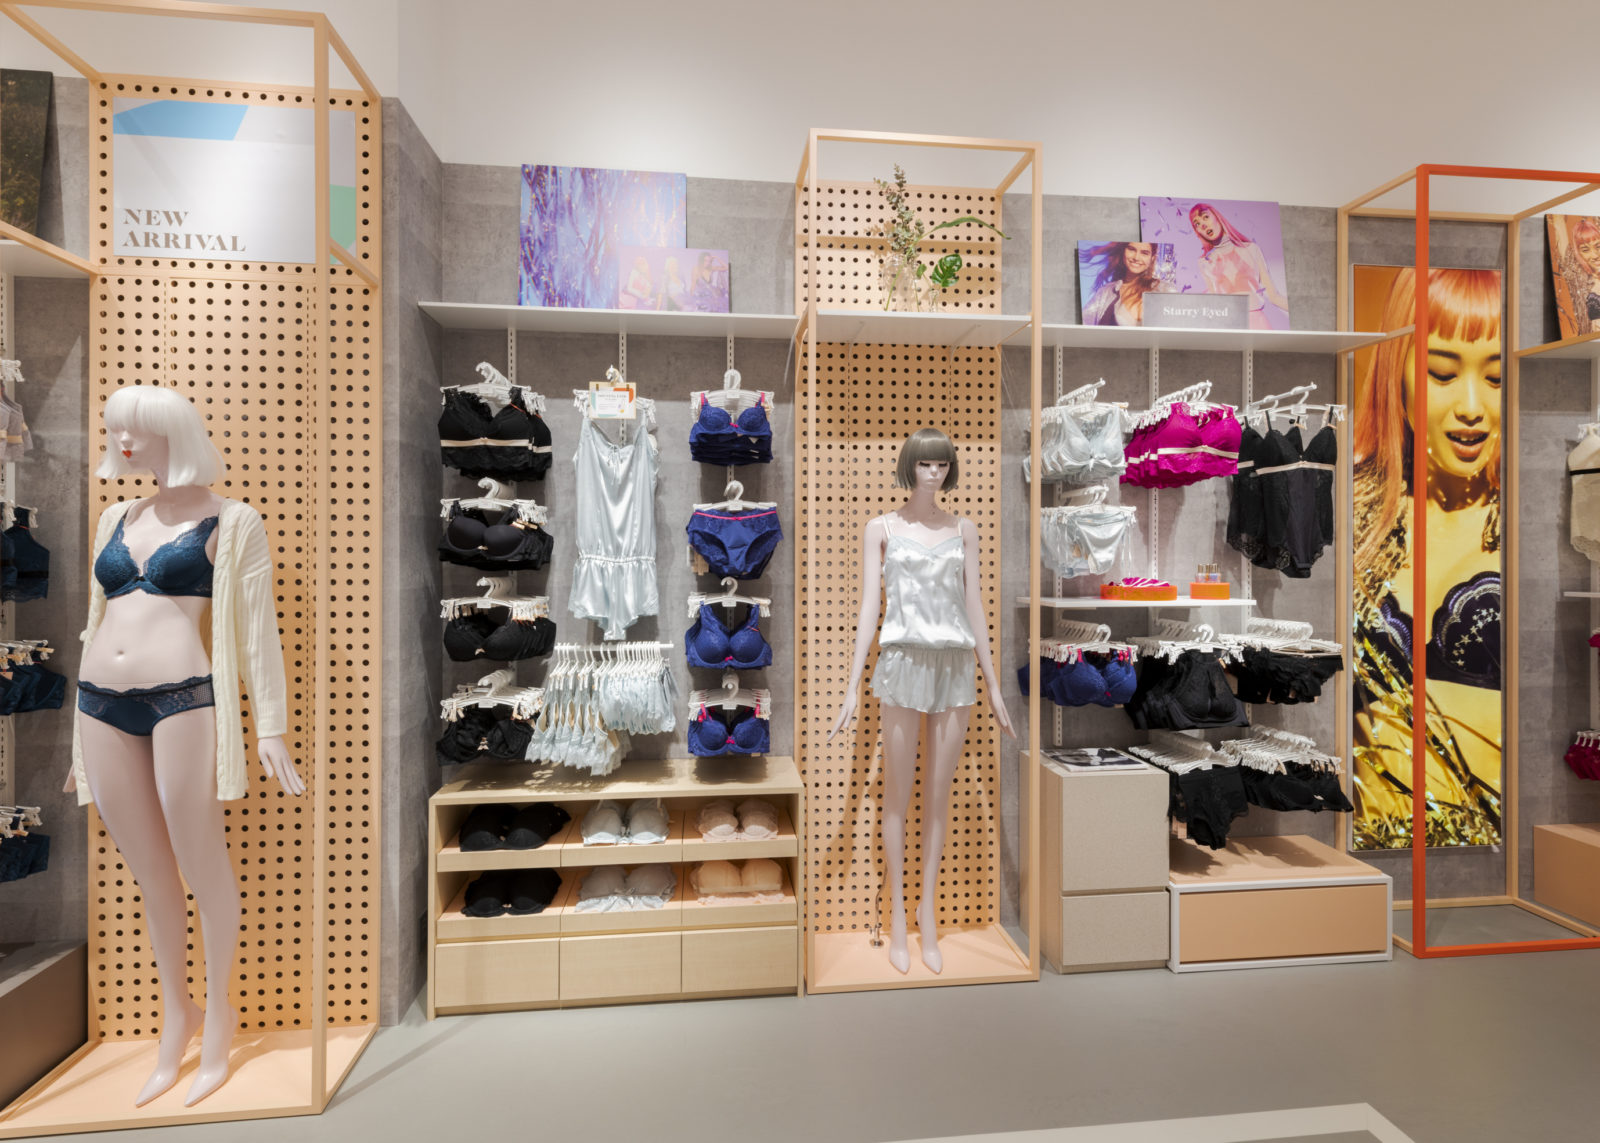 Rally House in Expansion Mode – Visual Merchandising and Store Design